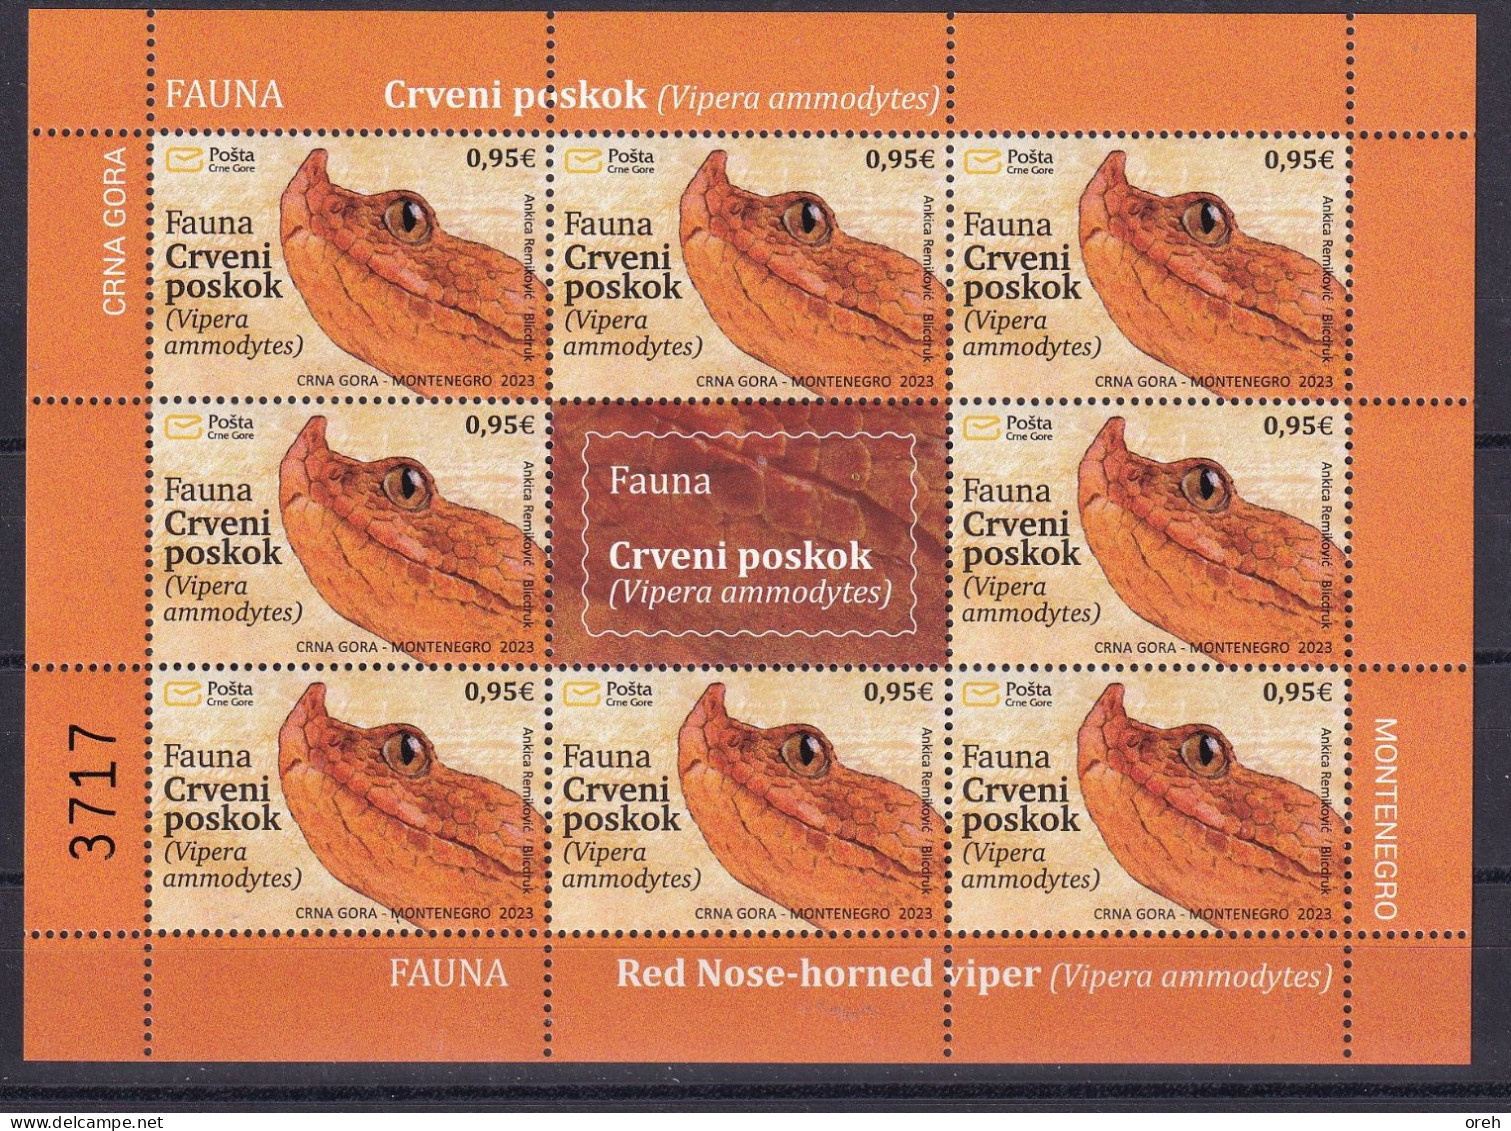 MONTENEGRO 2023,FAUNA,SNAKES,RED NOSE,HORNED VIPER,SHEET,WIGNETTE,MNH - Serpientes